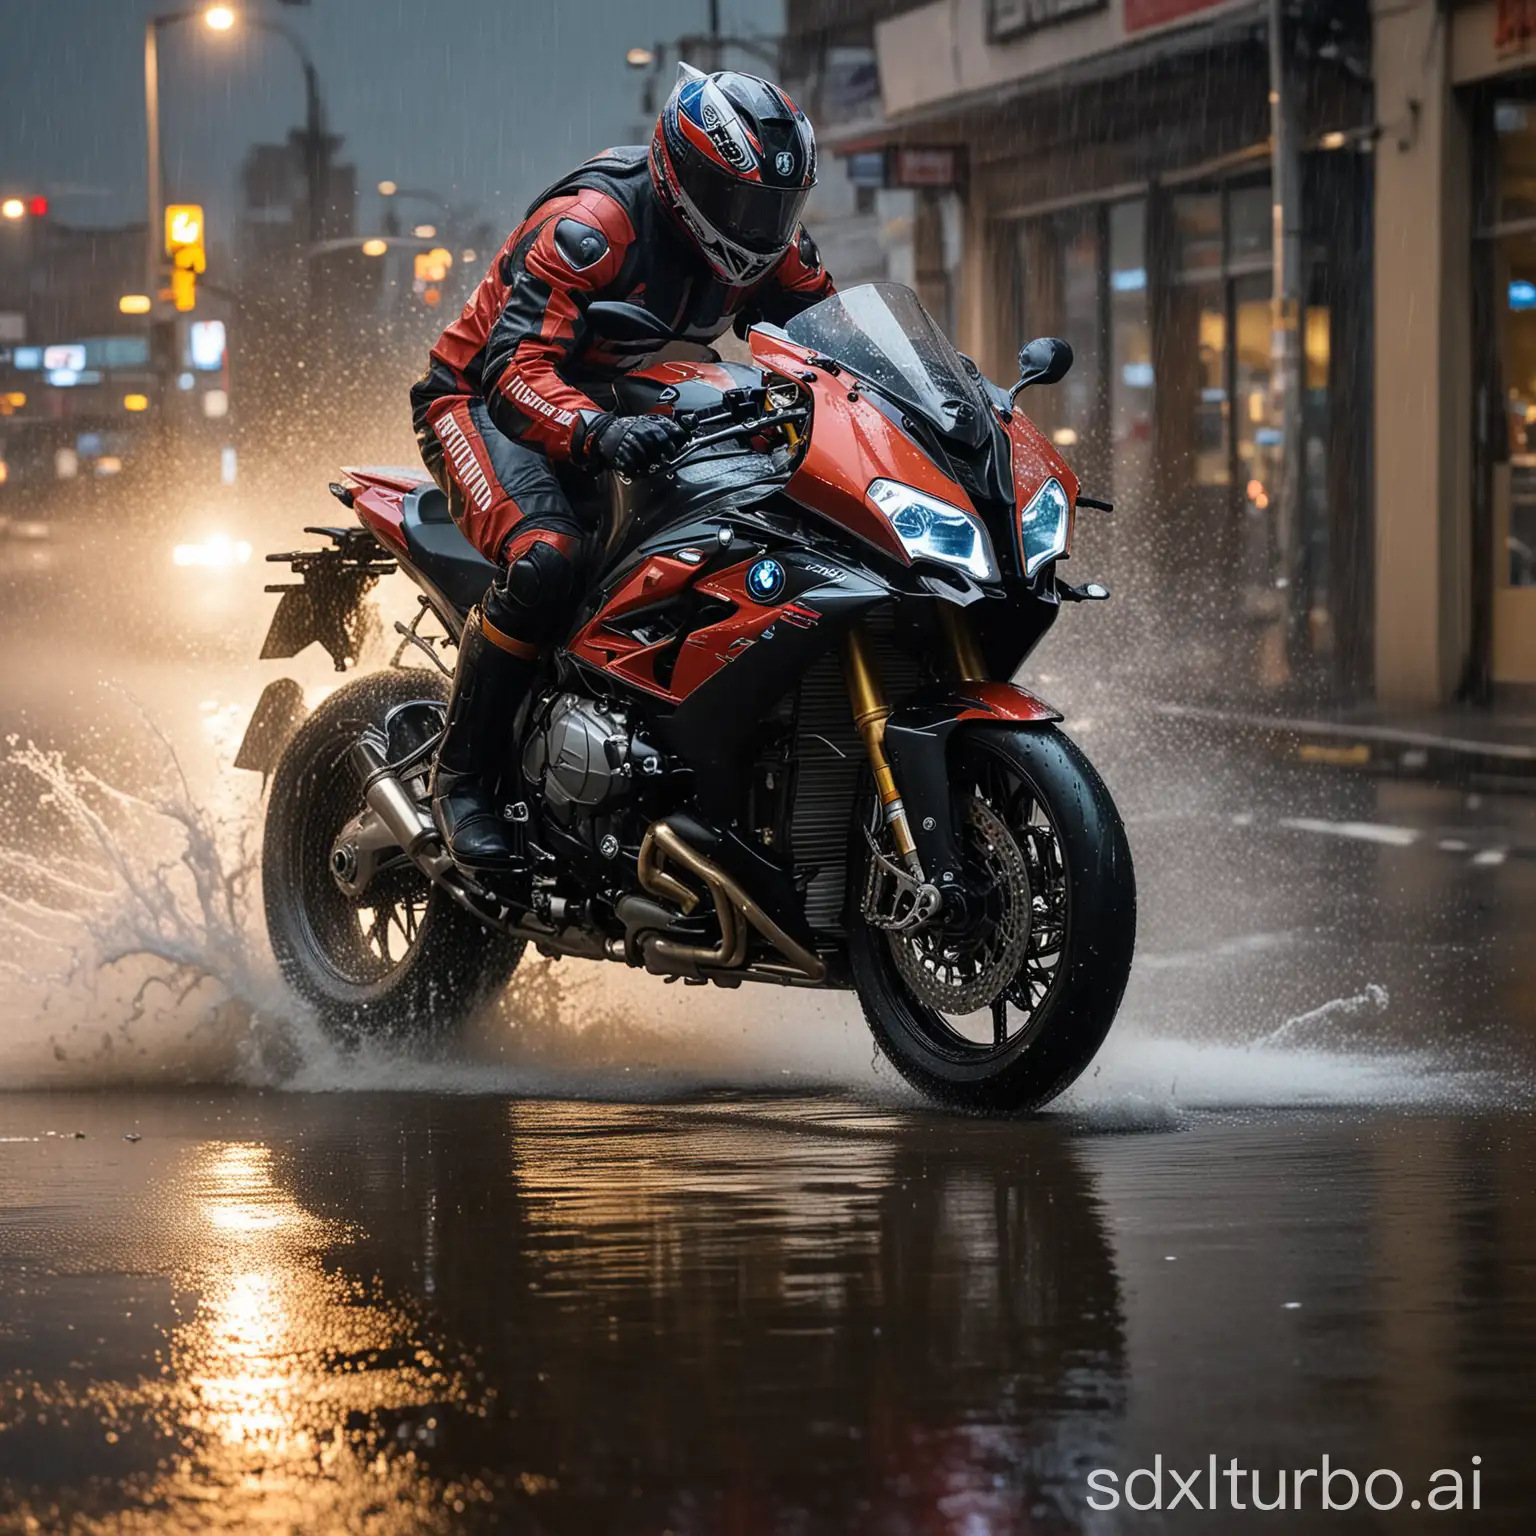 Thrilling-Night-Ride-BMW-S1000RR-Motorcyclist-Braving-Torrential-Downpour